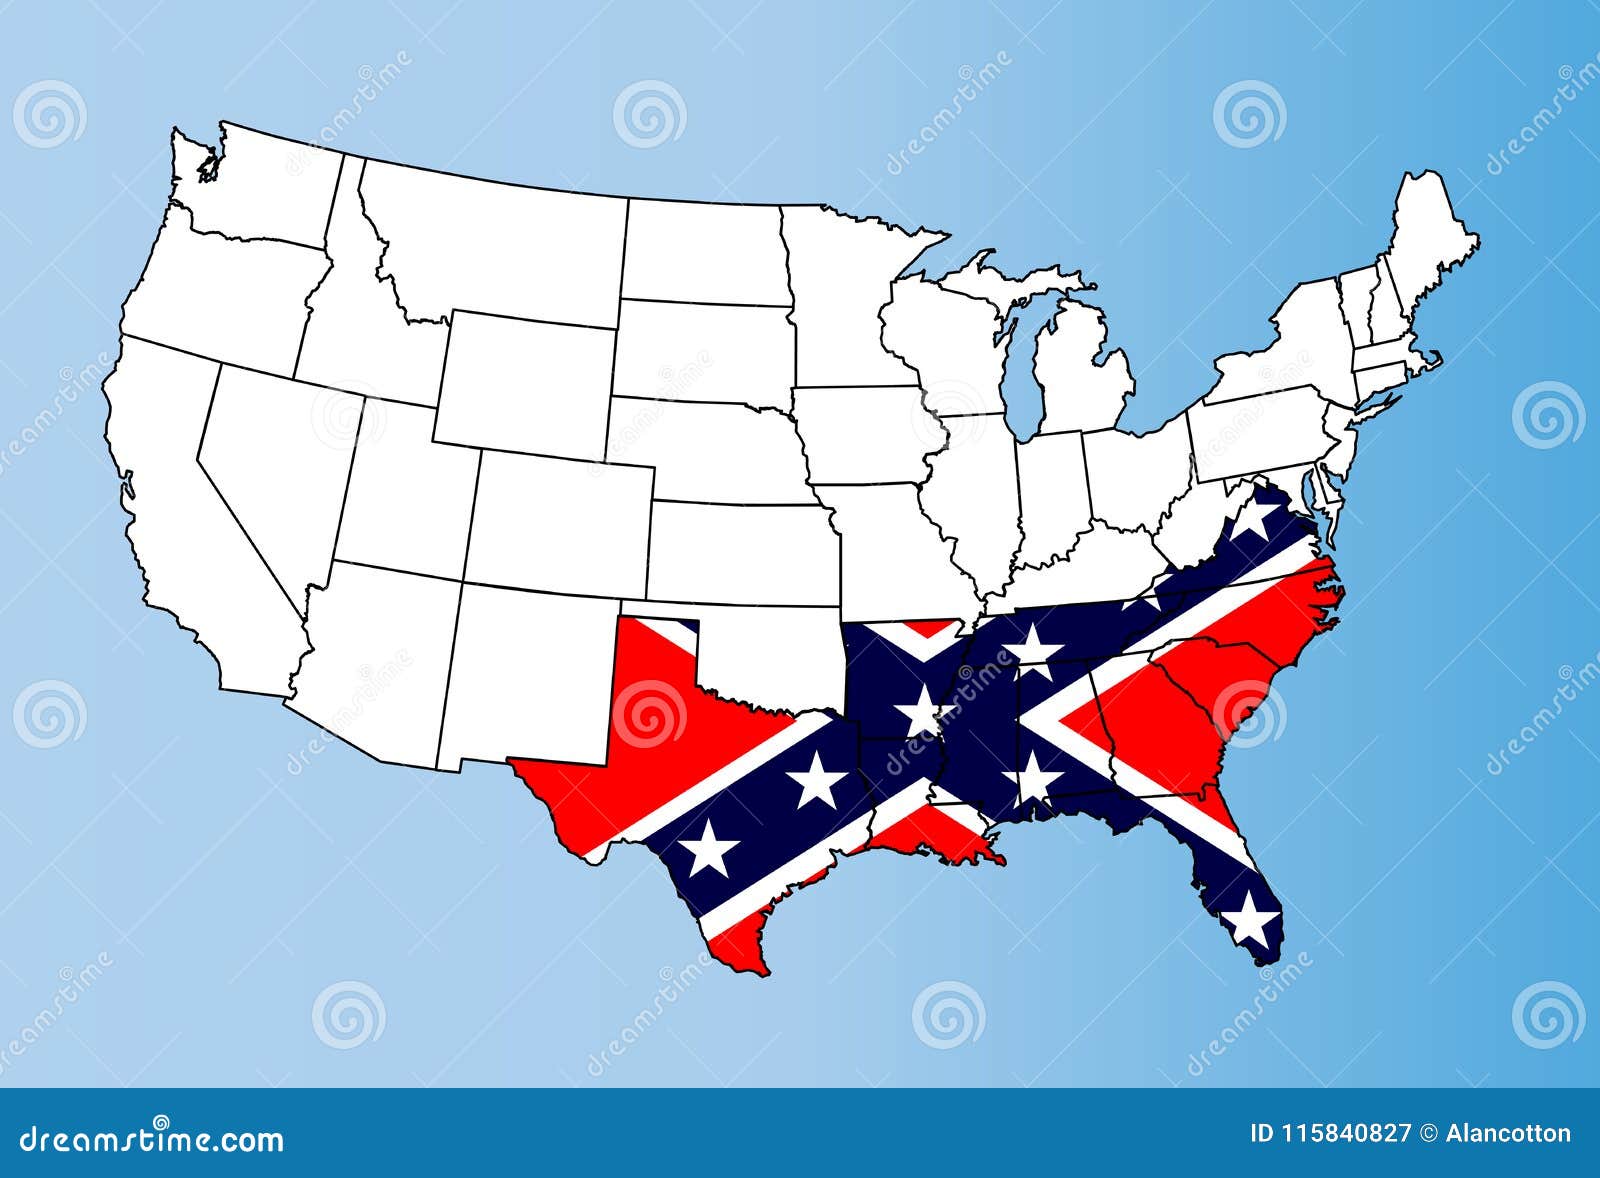 confederate states map and rebel flag